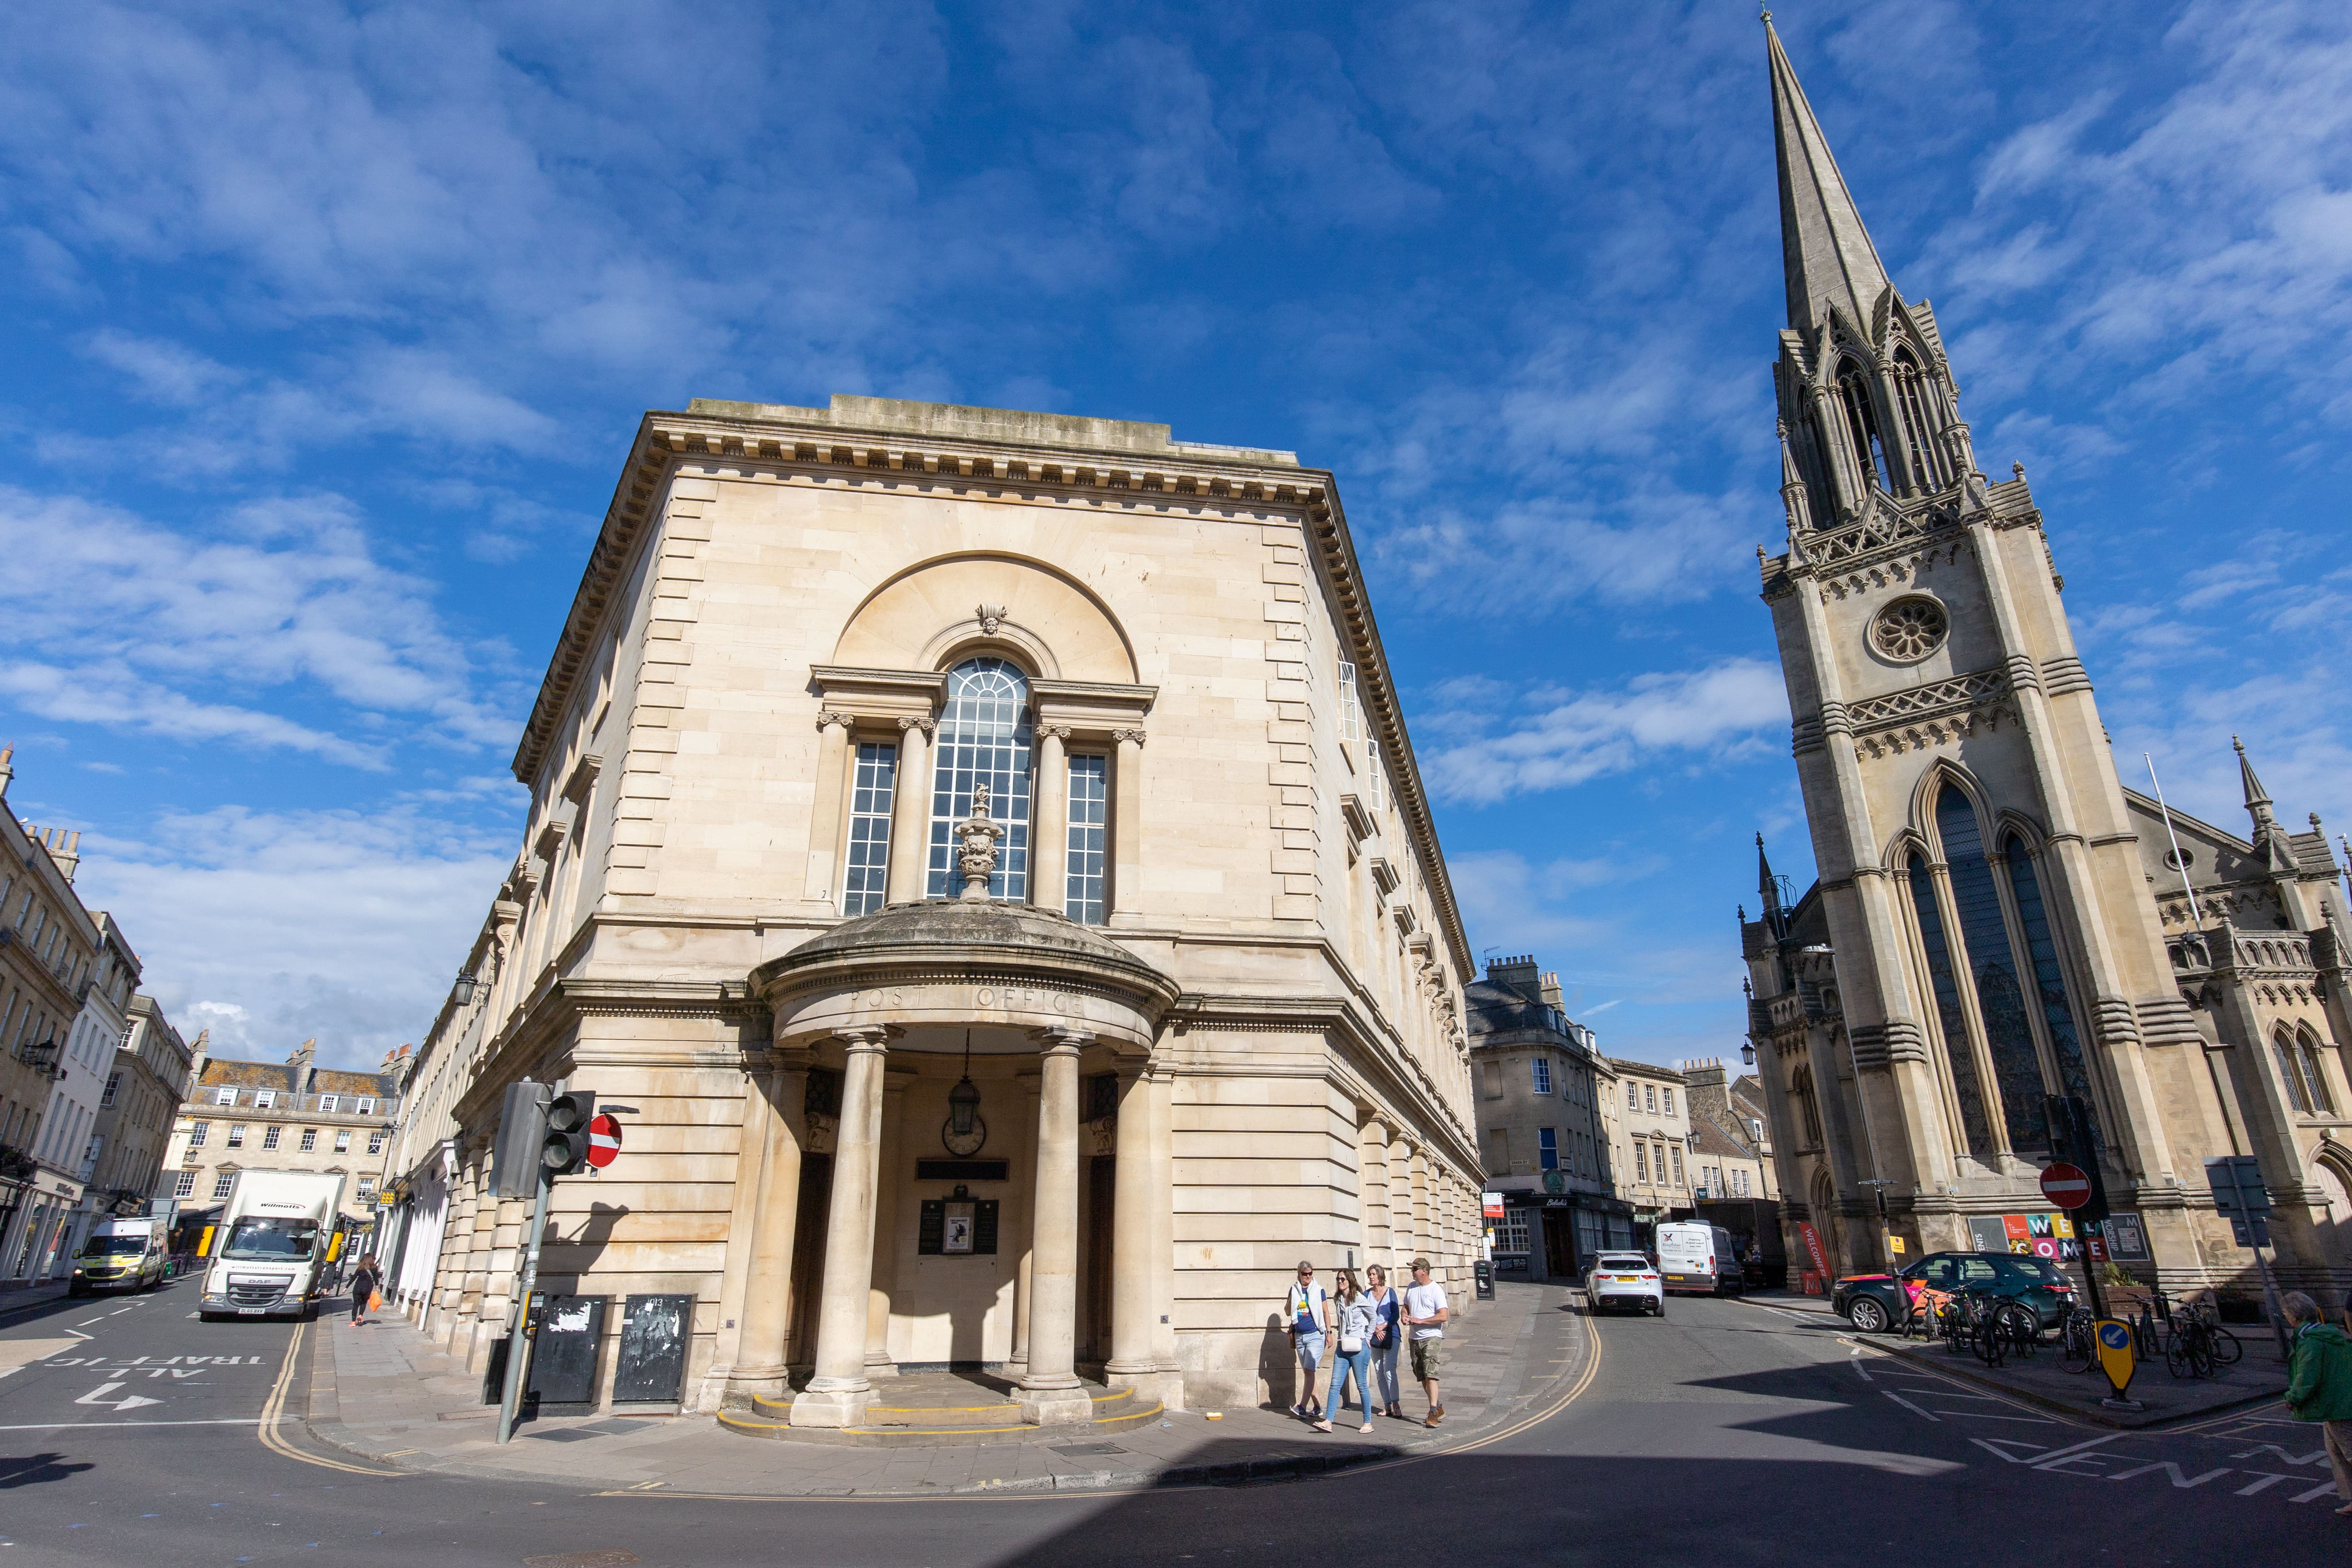 The Old Post Office in Bath